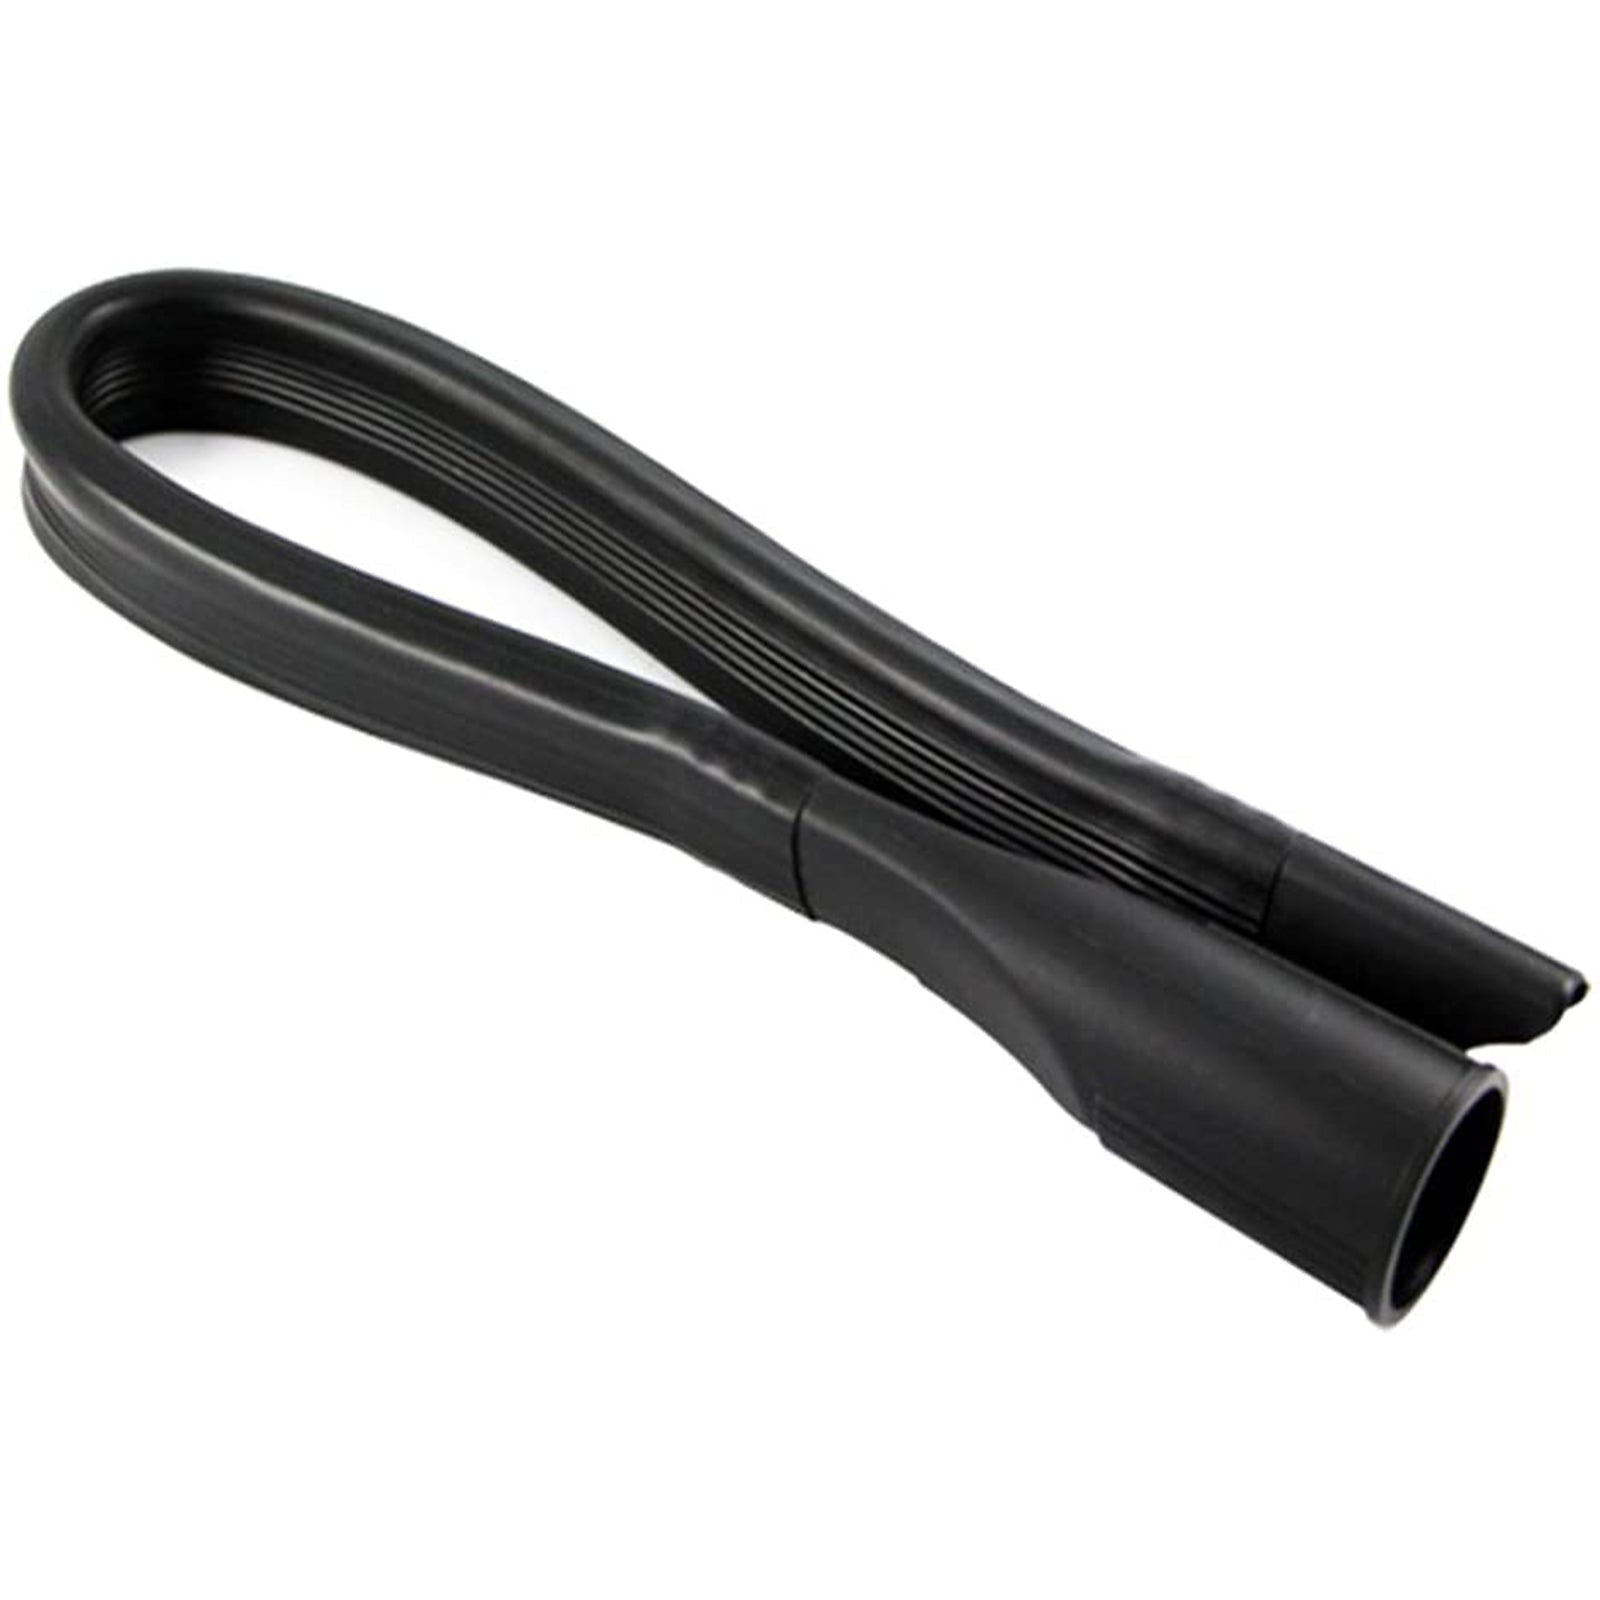 Flexible Crevice Tool Extra Long compatible with BISSELL Vacuum Cleaner (32mm or 35mm)